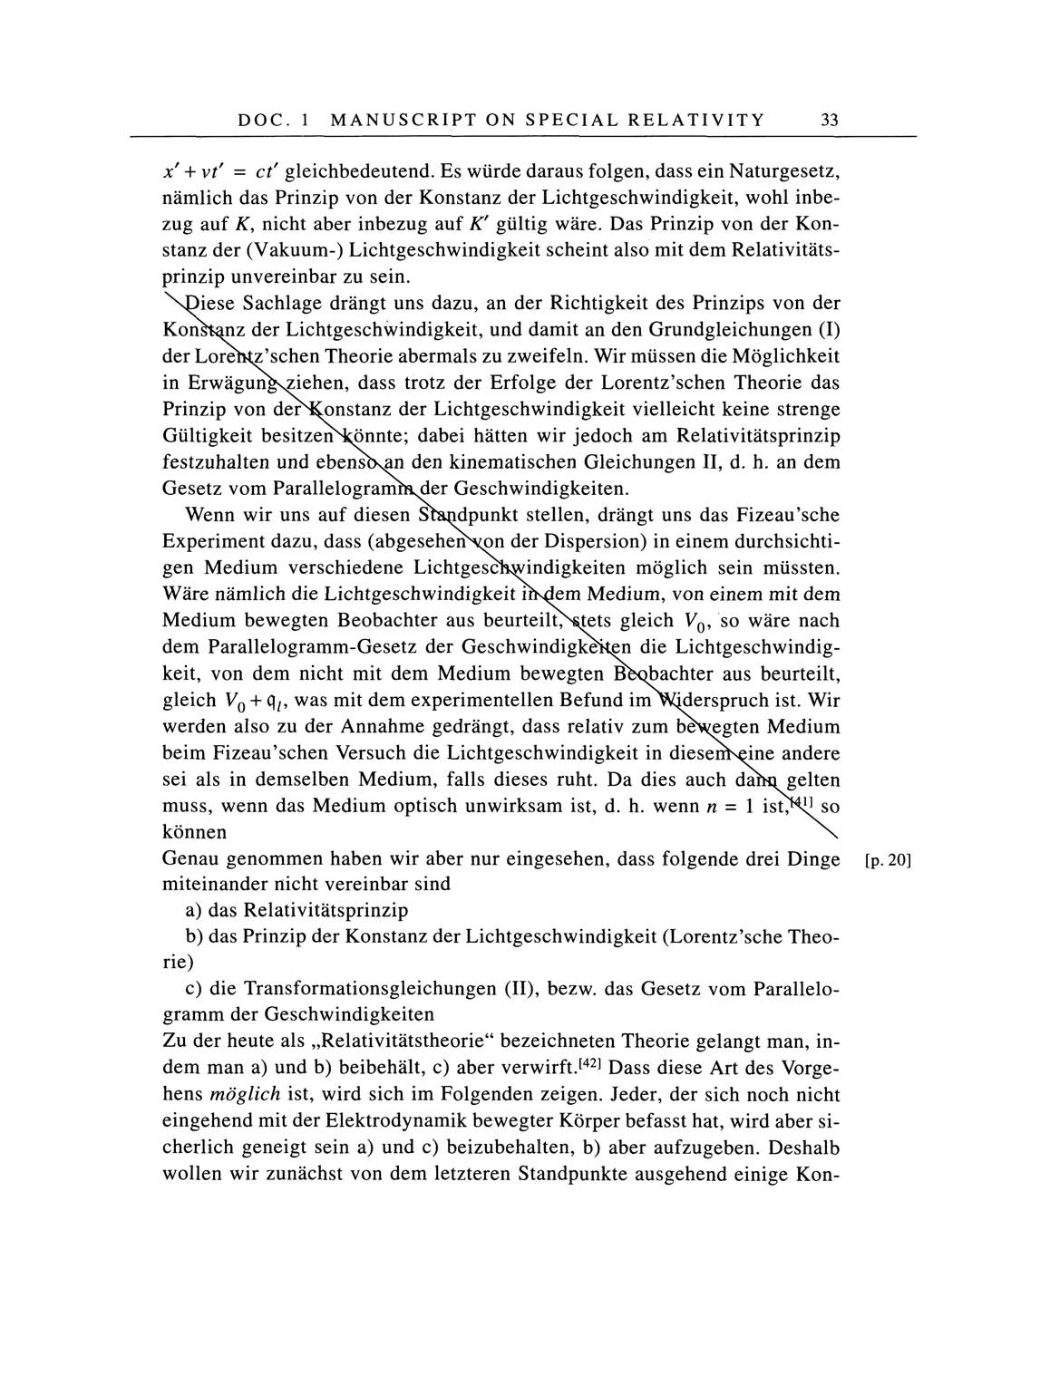 Volume 4: The Swiss Years: Writings 1912-1914 page 33